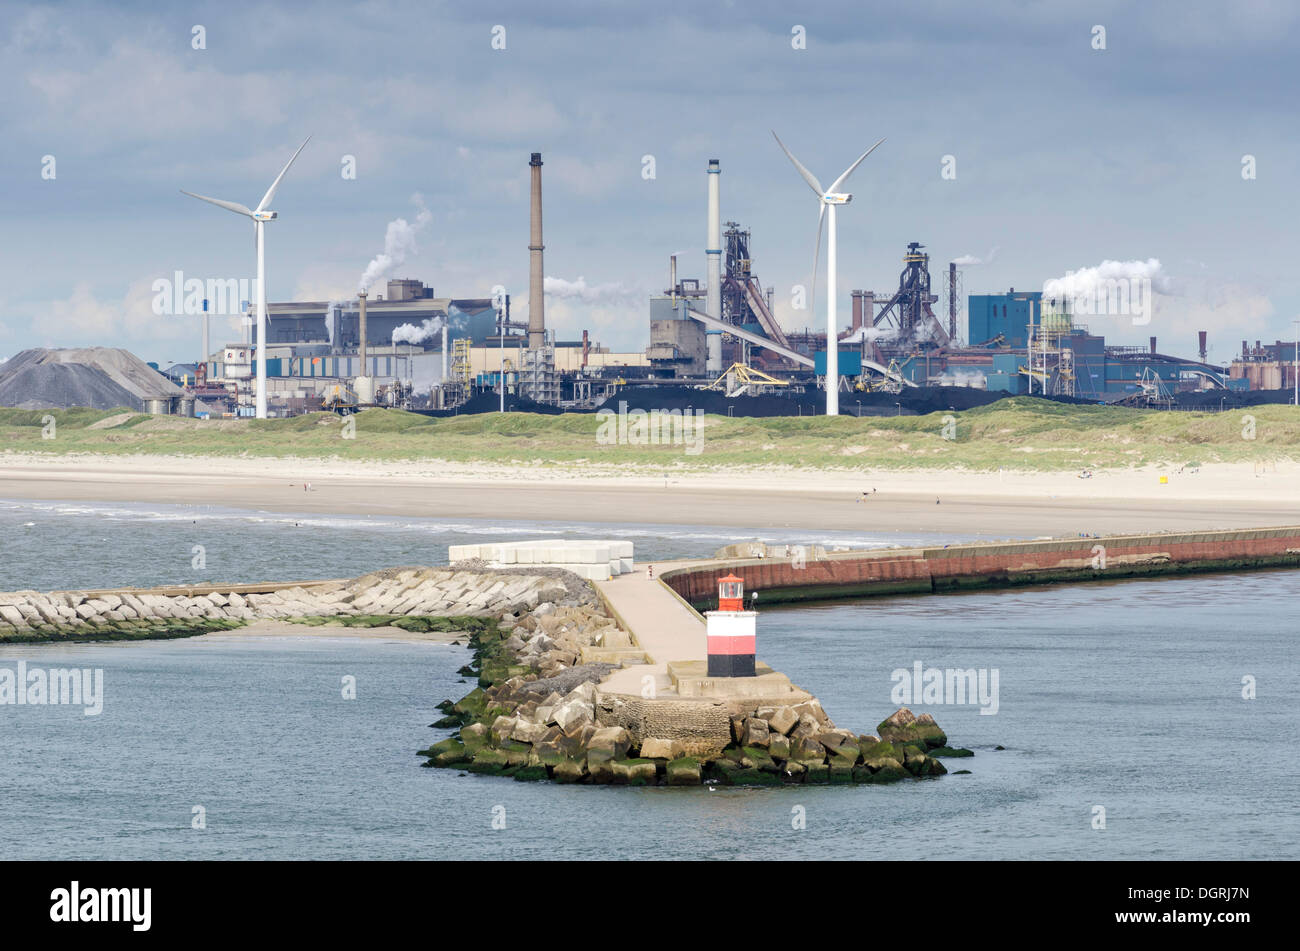 Lighthouse at the harbor entrance of Ijmuiden, wind turbines and the Tata steel plant at the back, North Holland, Netherlands Stock Photo